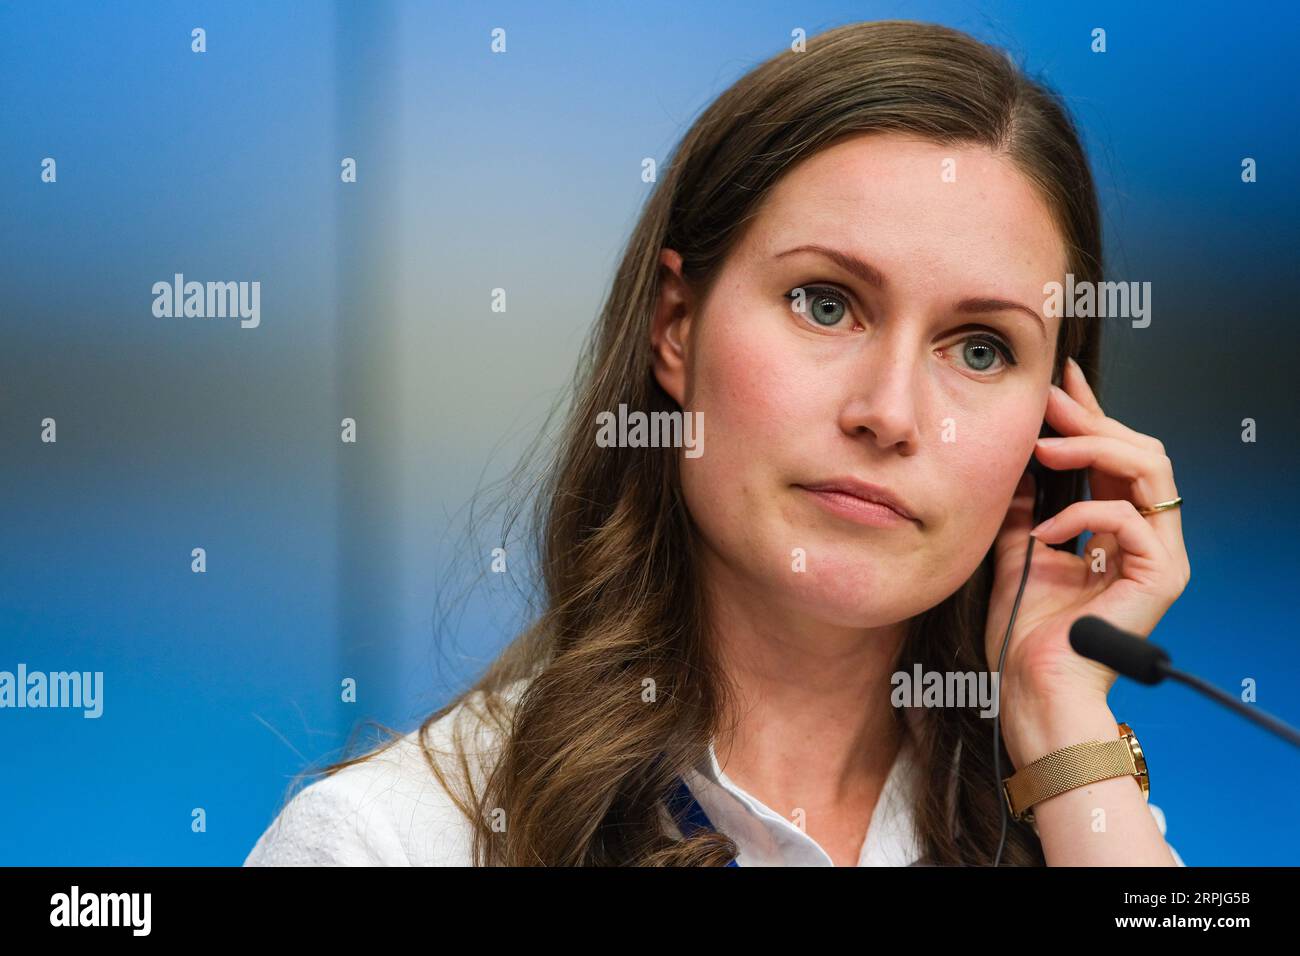 191209 -- BRUSSEL, Dec. 9, 2019 -- File photo taken on Sept. 20, 2019 shows Finnish Minister of Transport and Communications Sanna Marin attending a press conference of the EU Transport, Telecommunications and Energy Council in Brussels, Belgium. Finland s Social Democratic Party SDP, one of the five parties that form the coalition government, on Sunday picked 34-year-old Sanna Marin to be the country s youngest prime minister. Marin, who is currently Finnish Minister of Transport and Communications, narrowly won over Antti Lindtman, the 37-year-old chairman of the Social Democratic Parliament Stock Photo